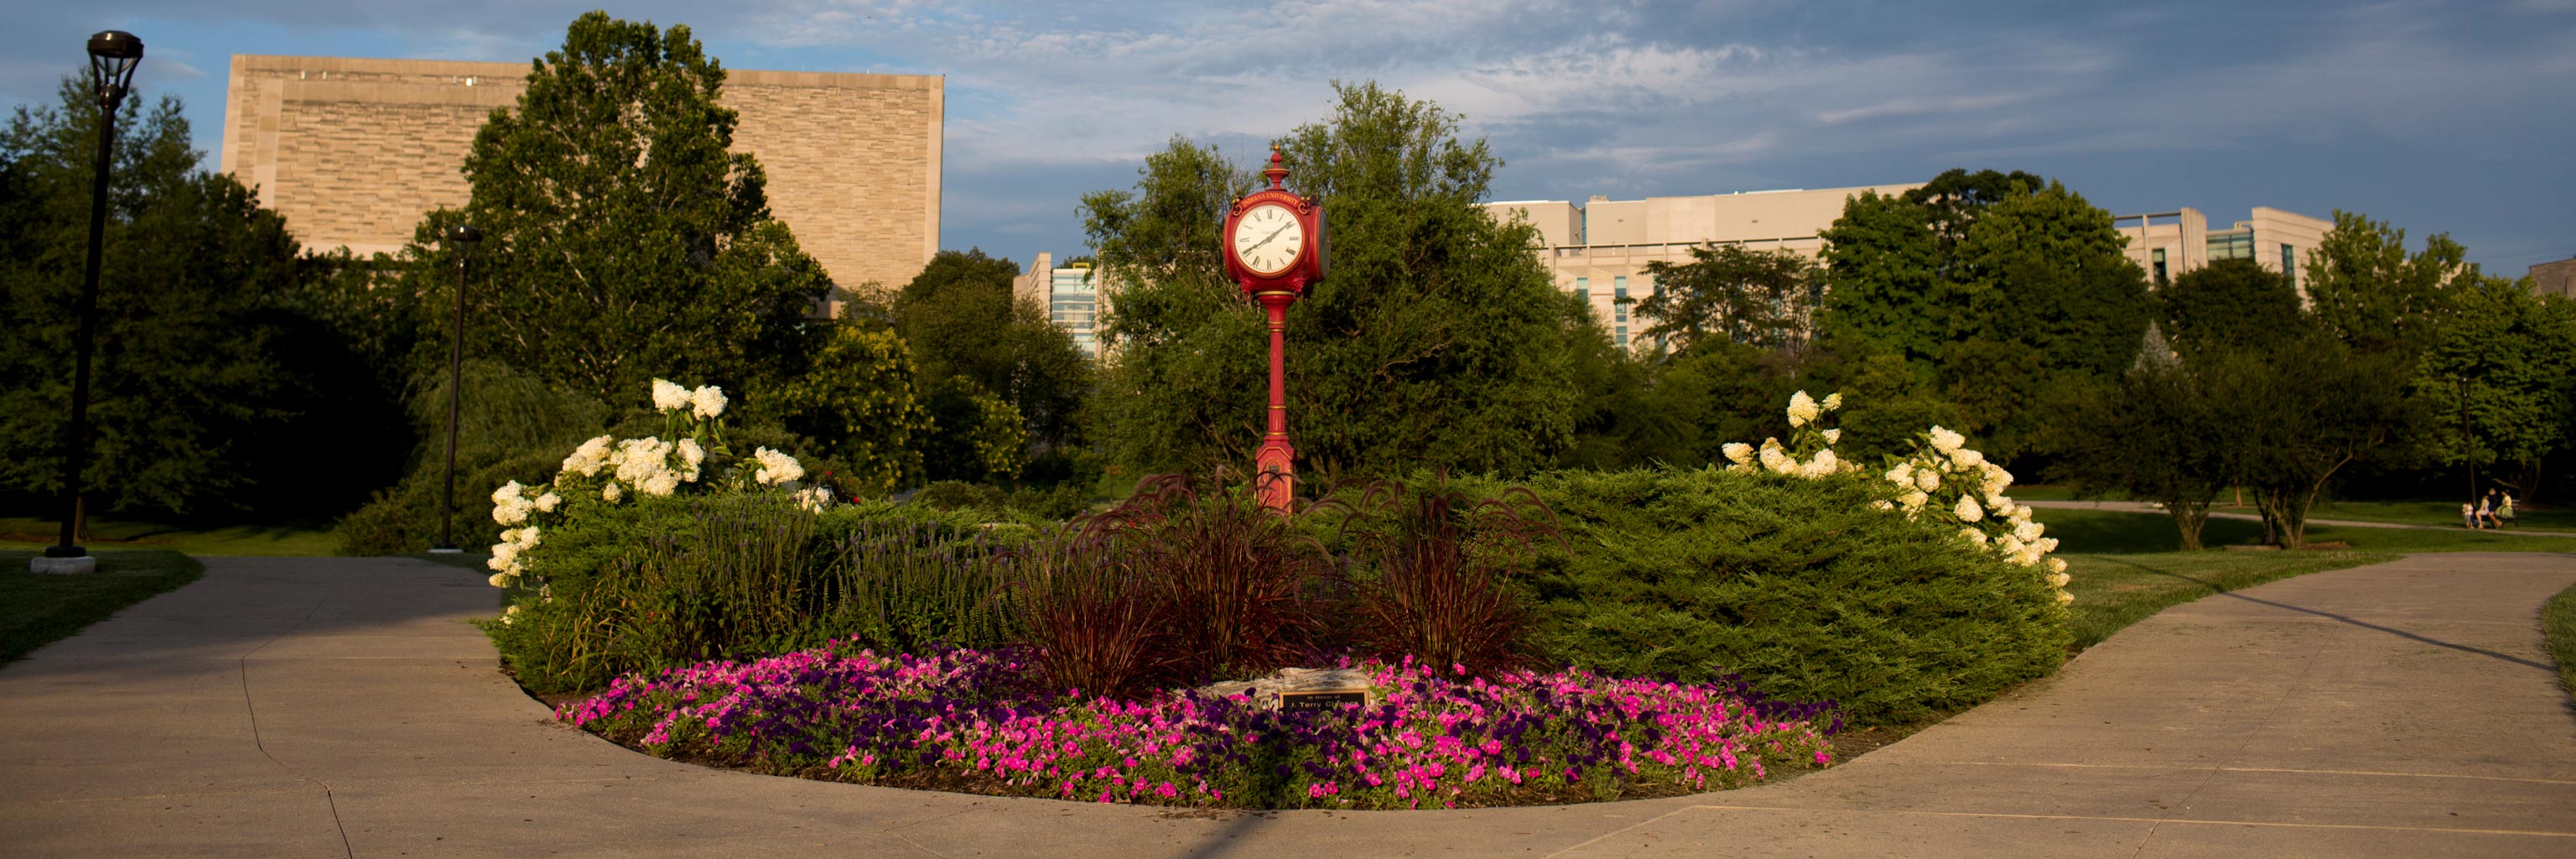 flowers, pathway, and decorative red clock